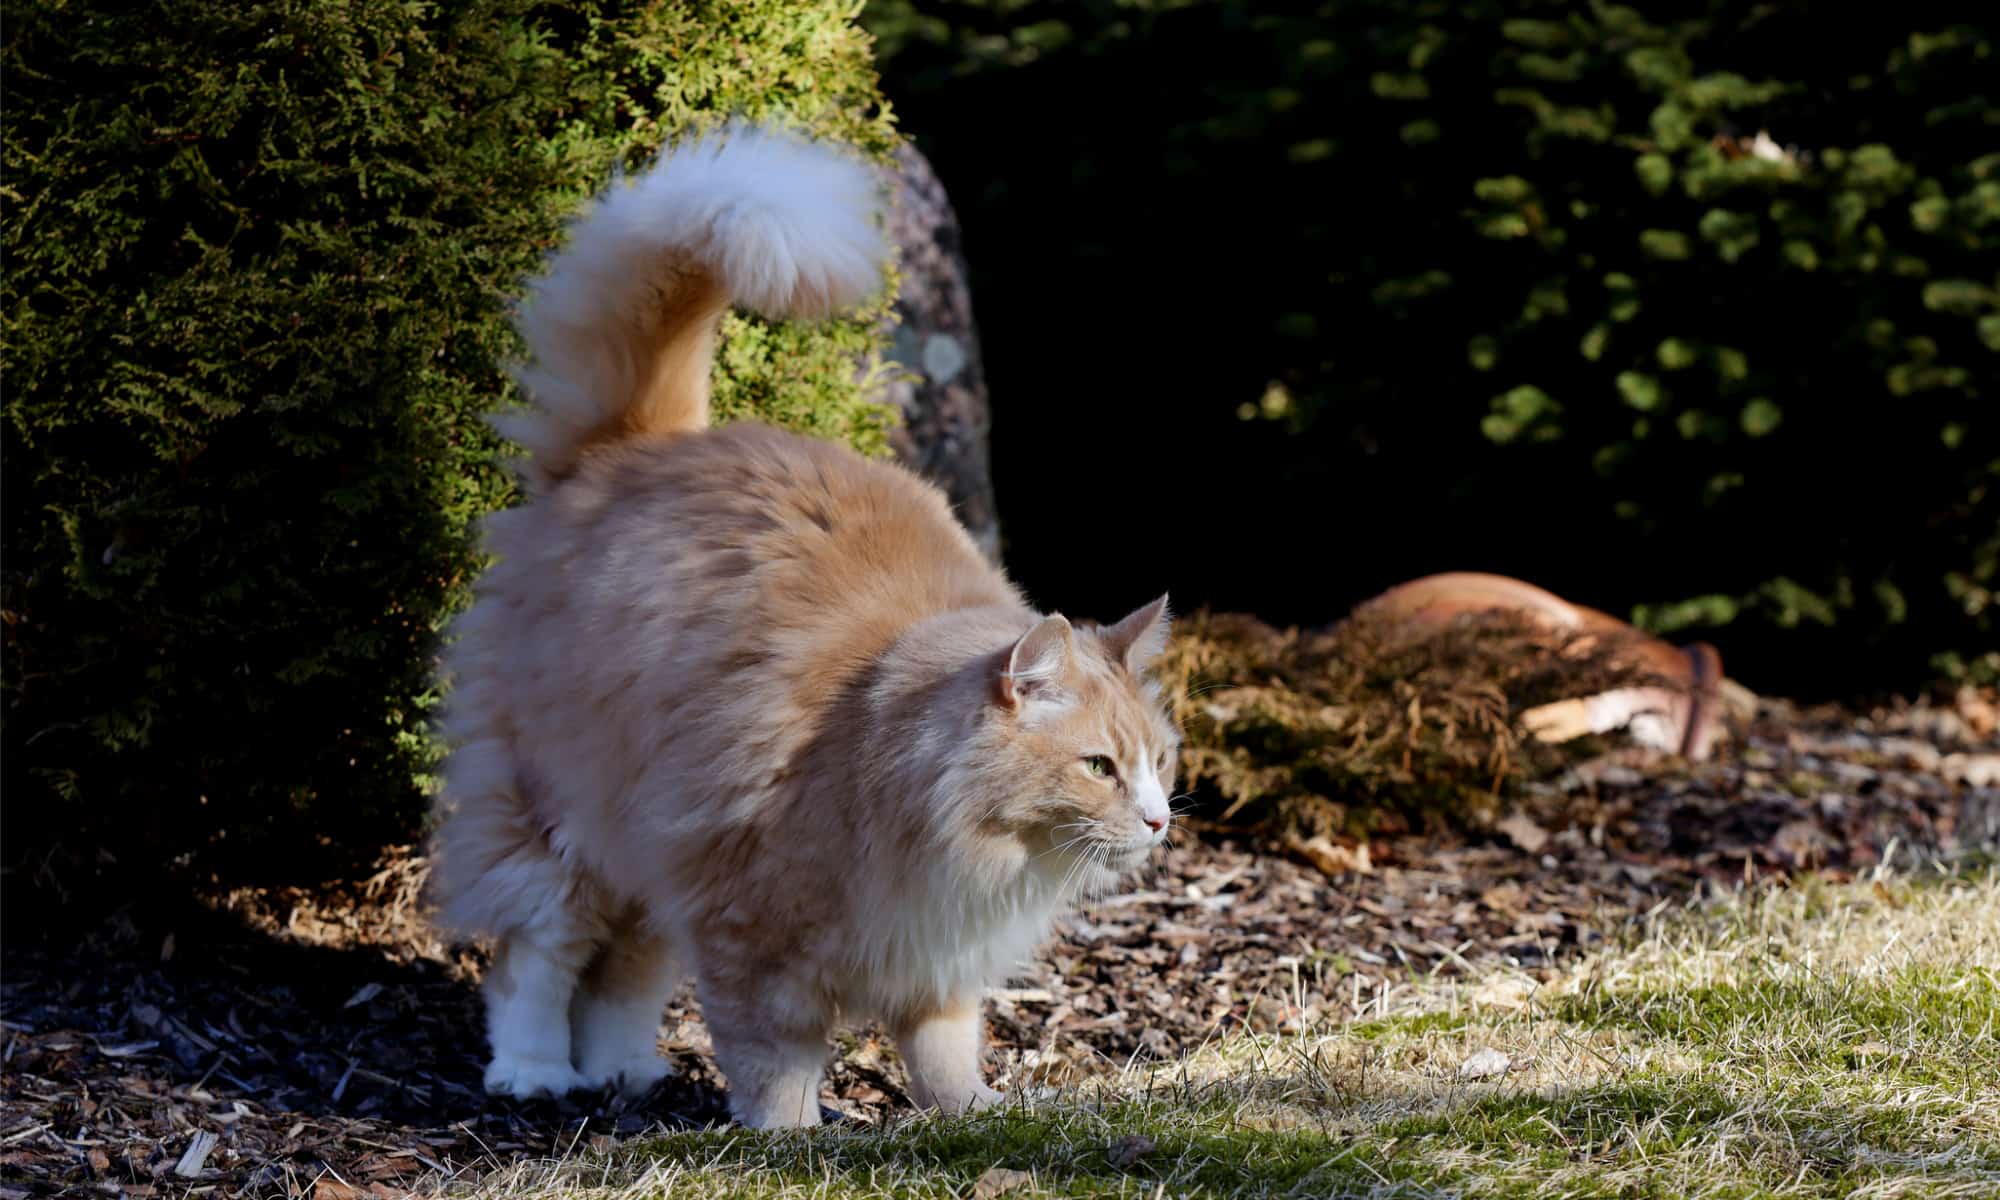 Norwegian forest cat marking territory by spraying.